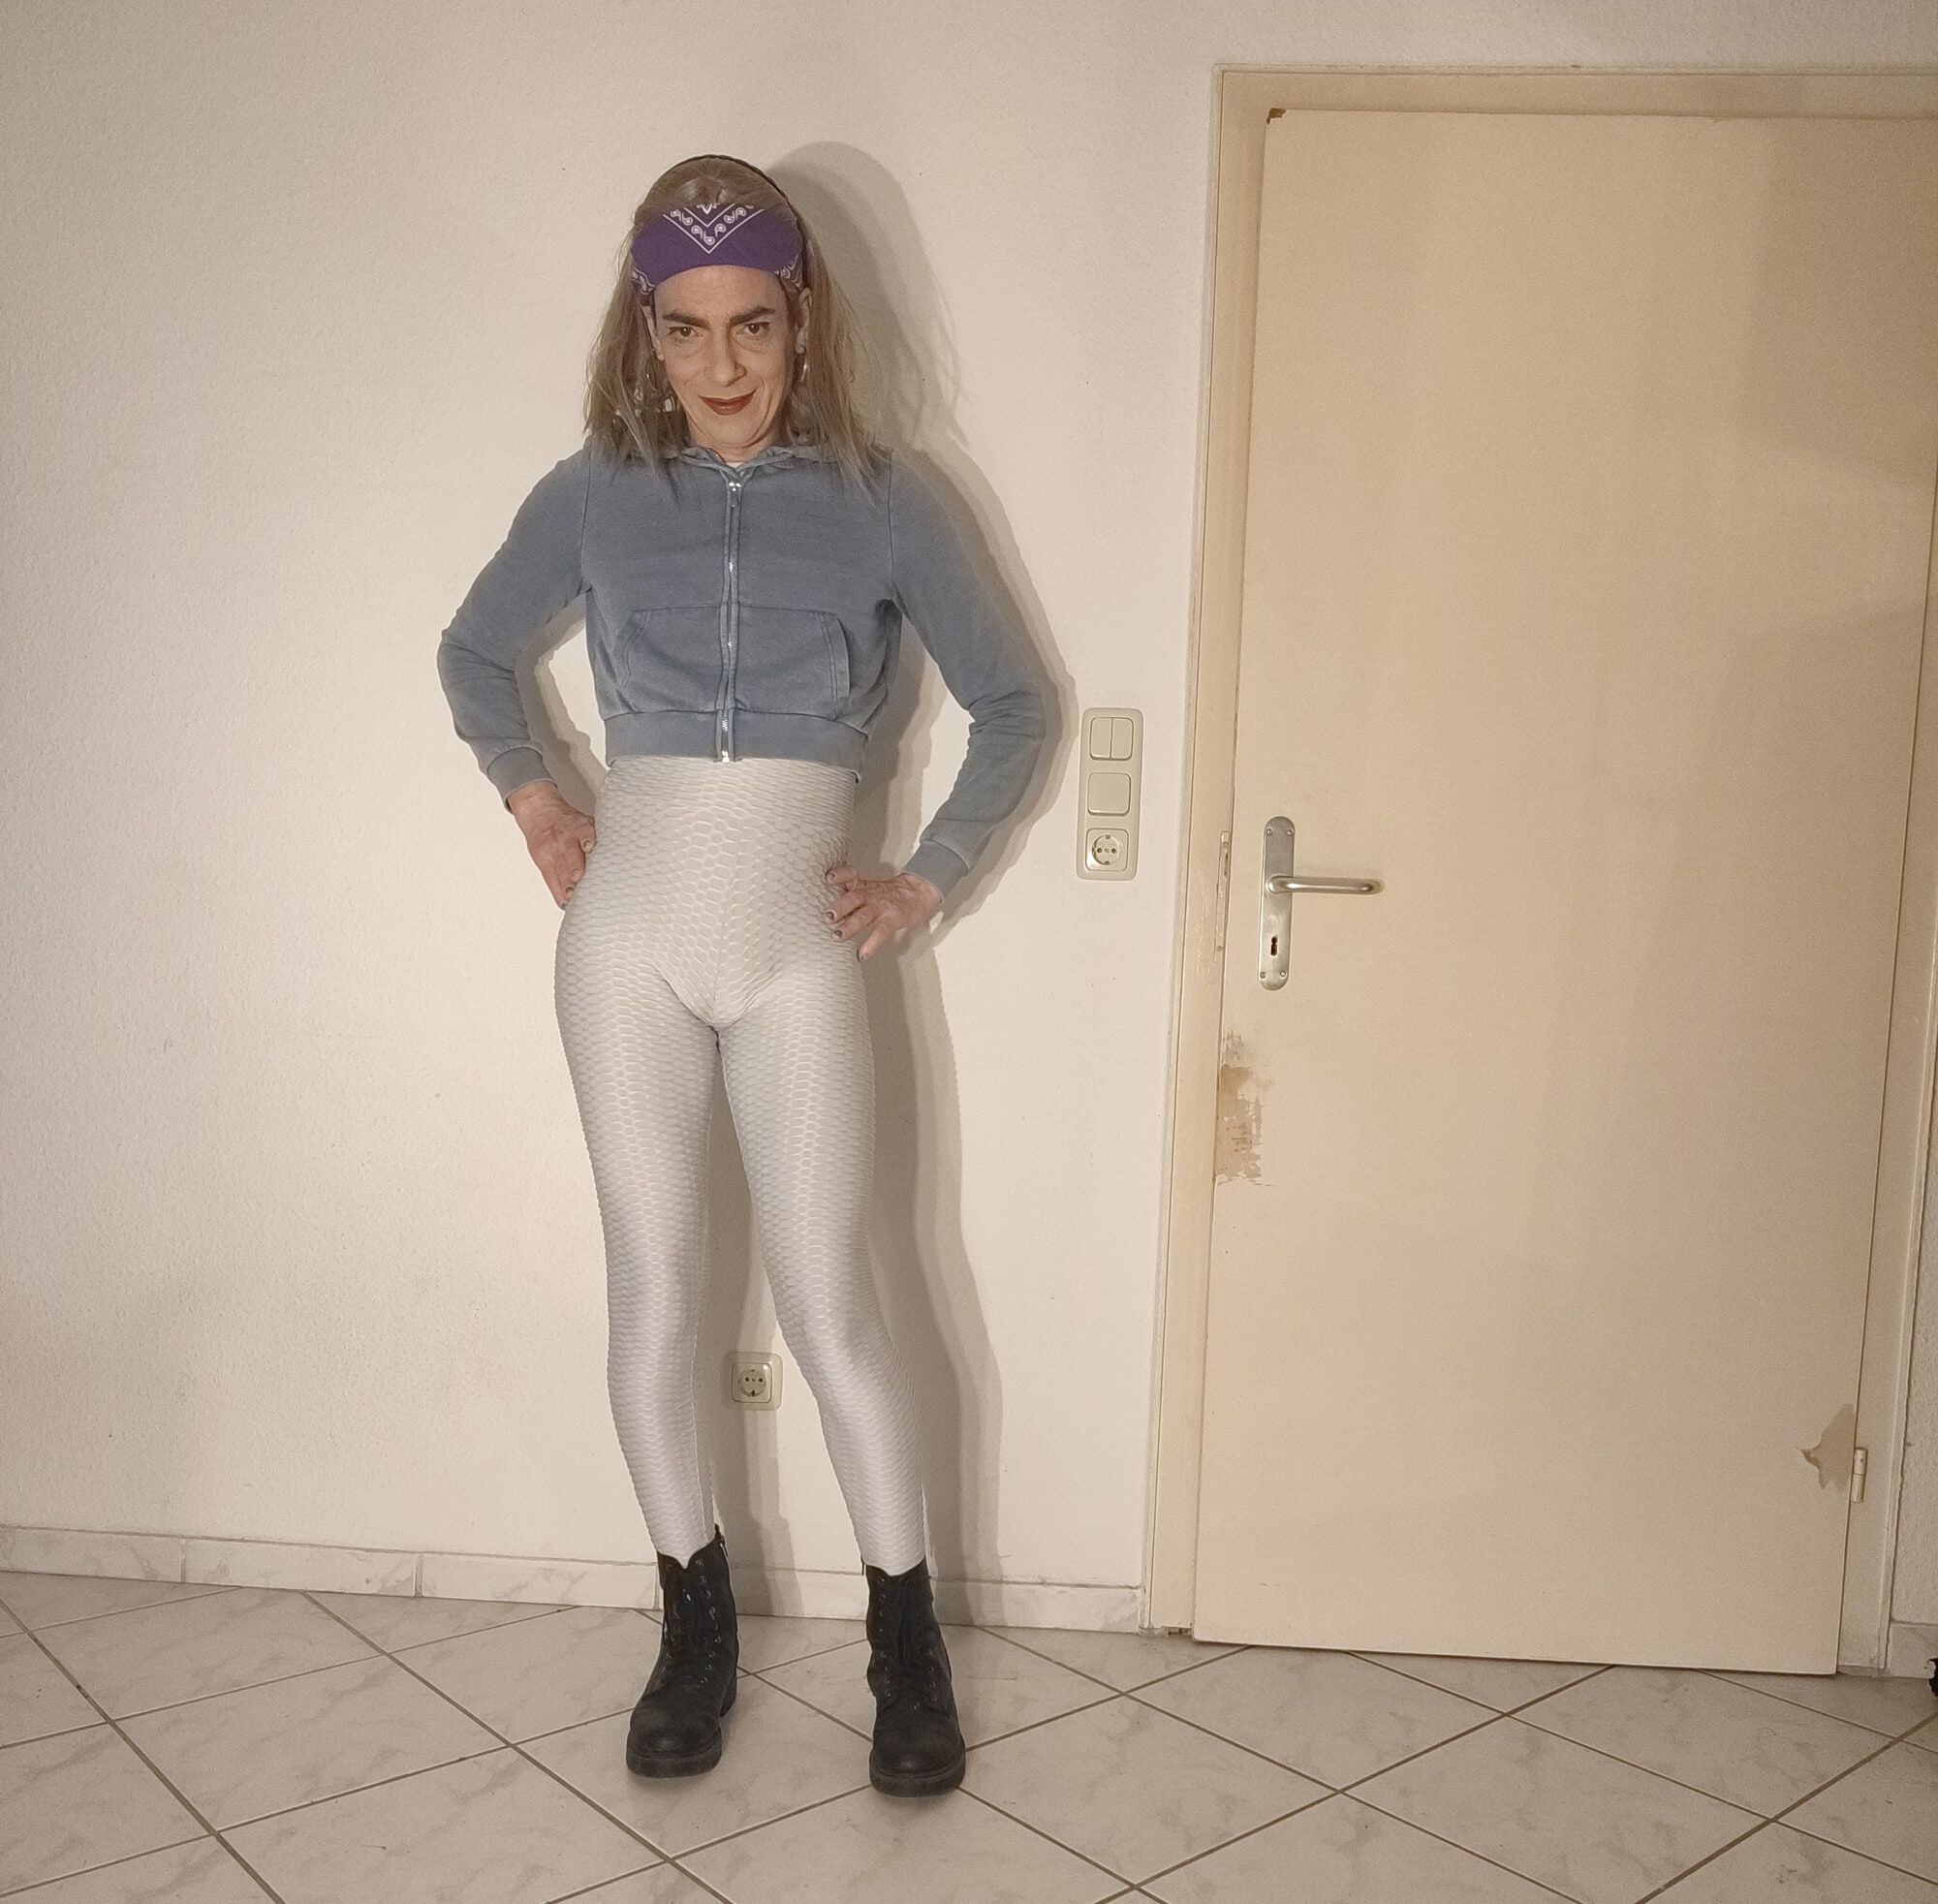 nonbinary femboy slut showing some hot outfits #7